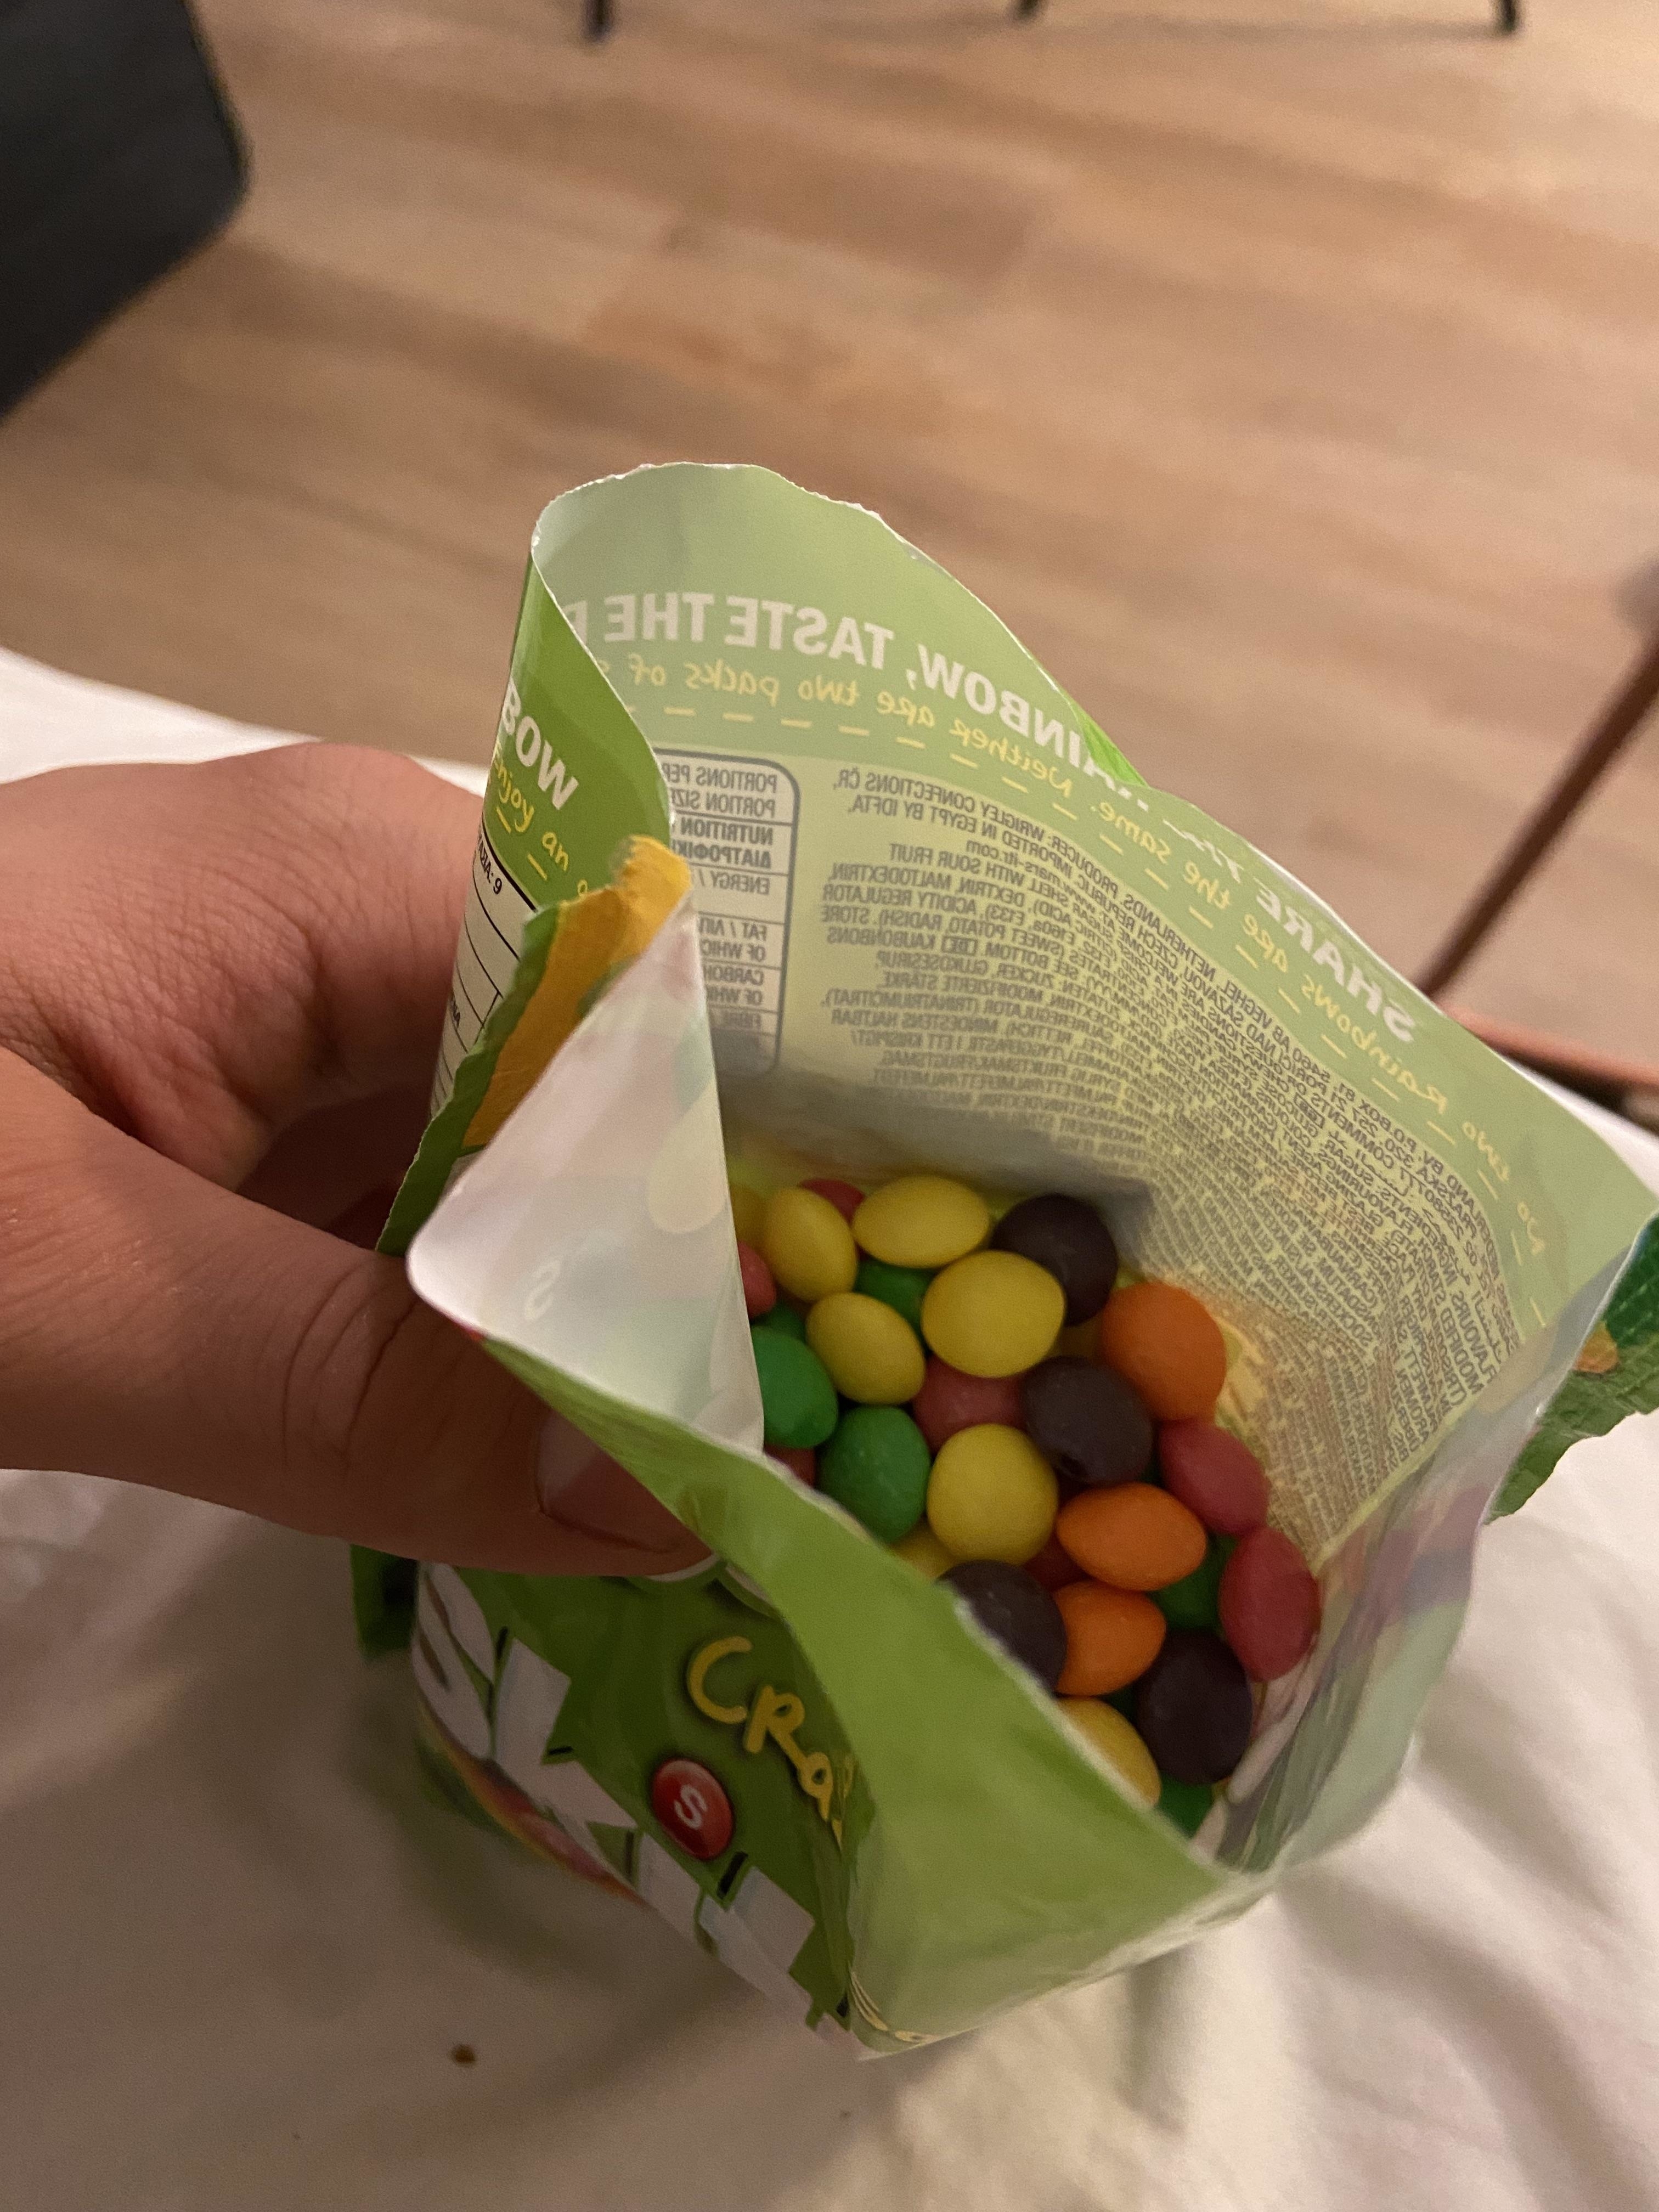 An open bag of Sour Skittles showing candy-coated Skittles looking like M&amp;amp;M&#x27;s